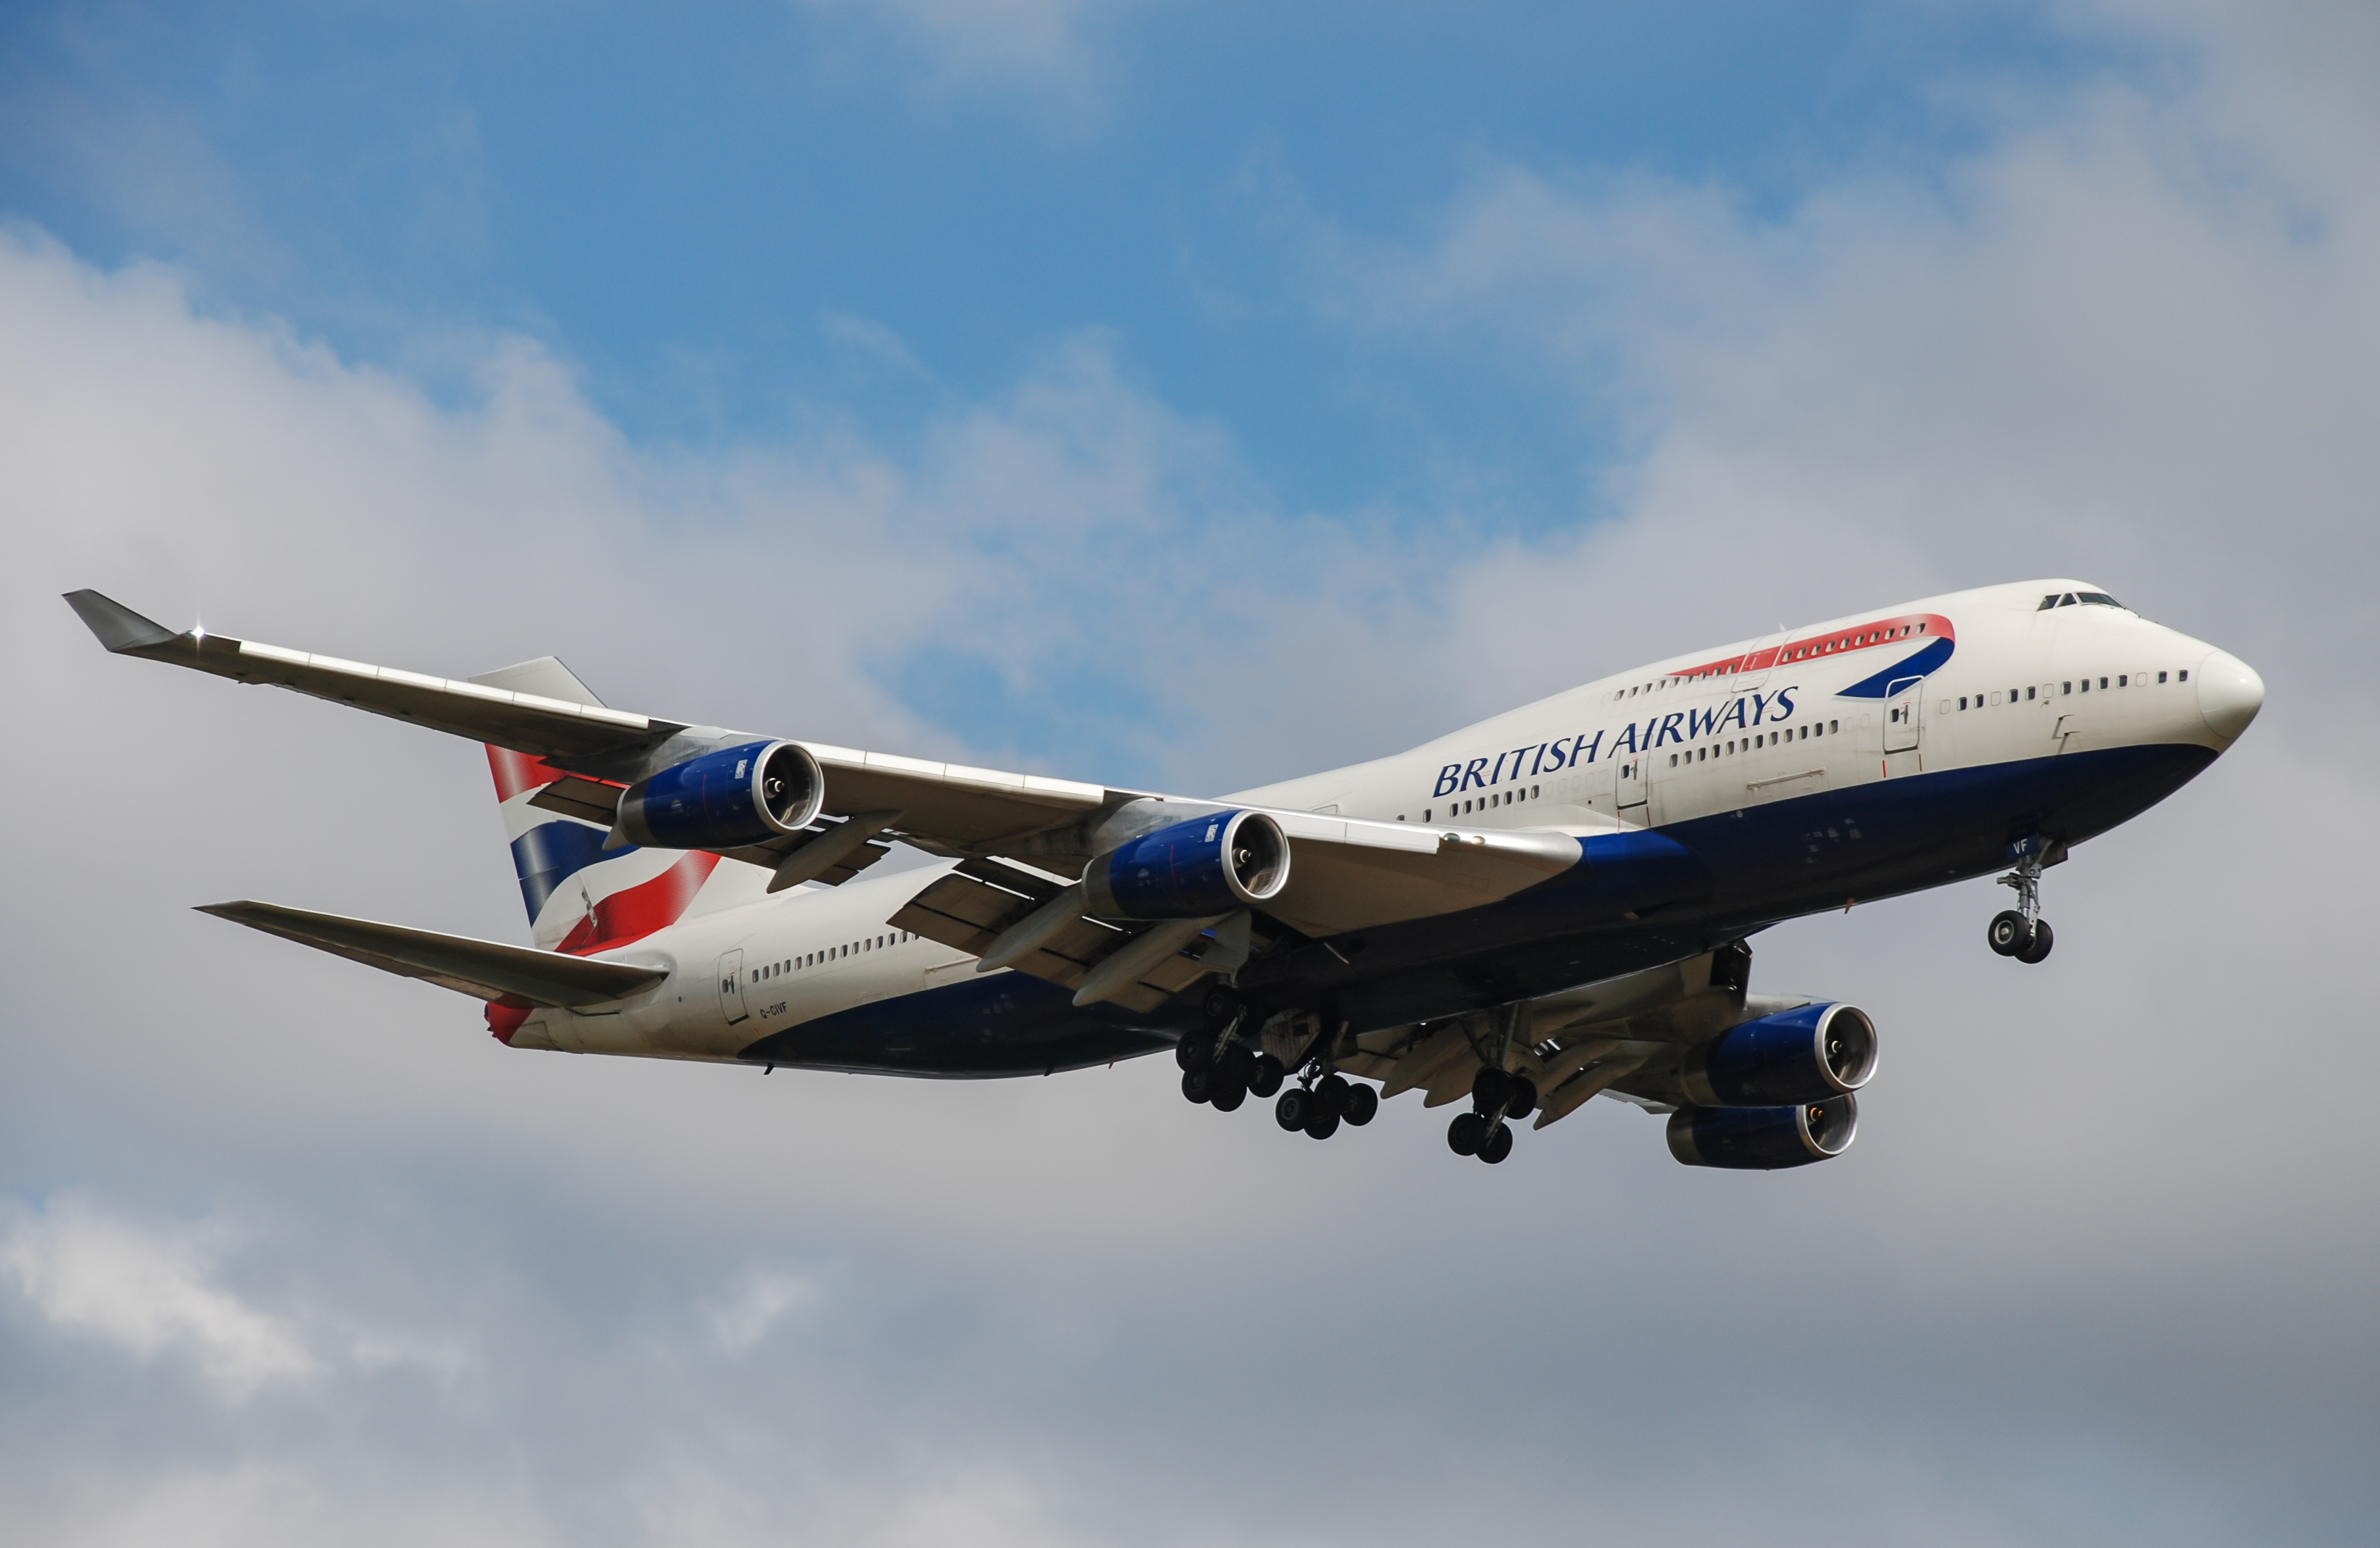 G-CIVF/GCIVF Withdrawn from use Boeing 747 Airframe Information - AVSpotters.com